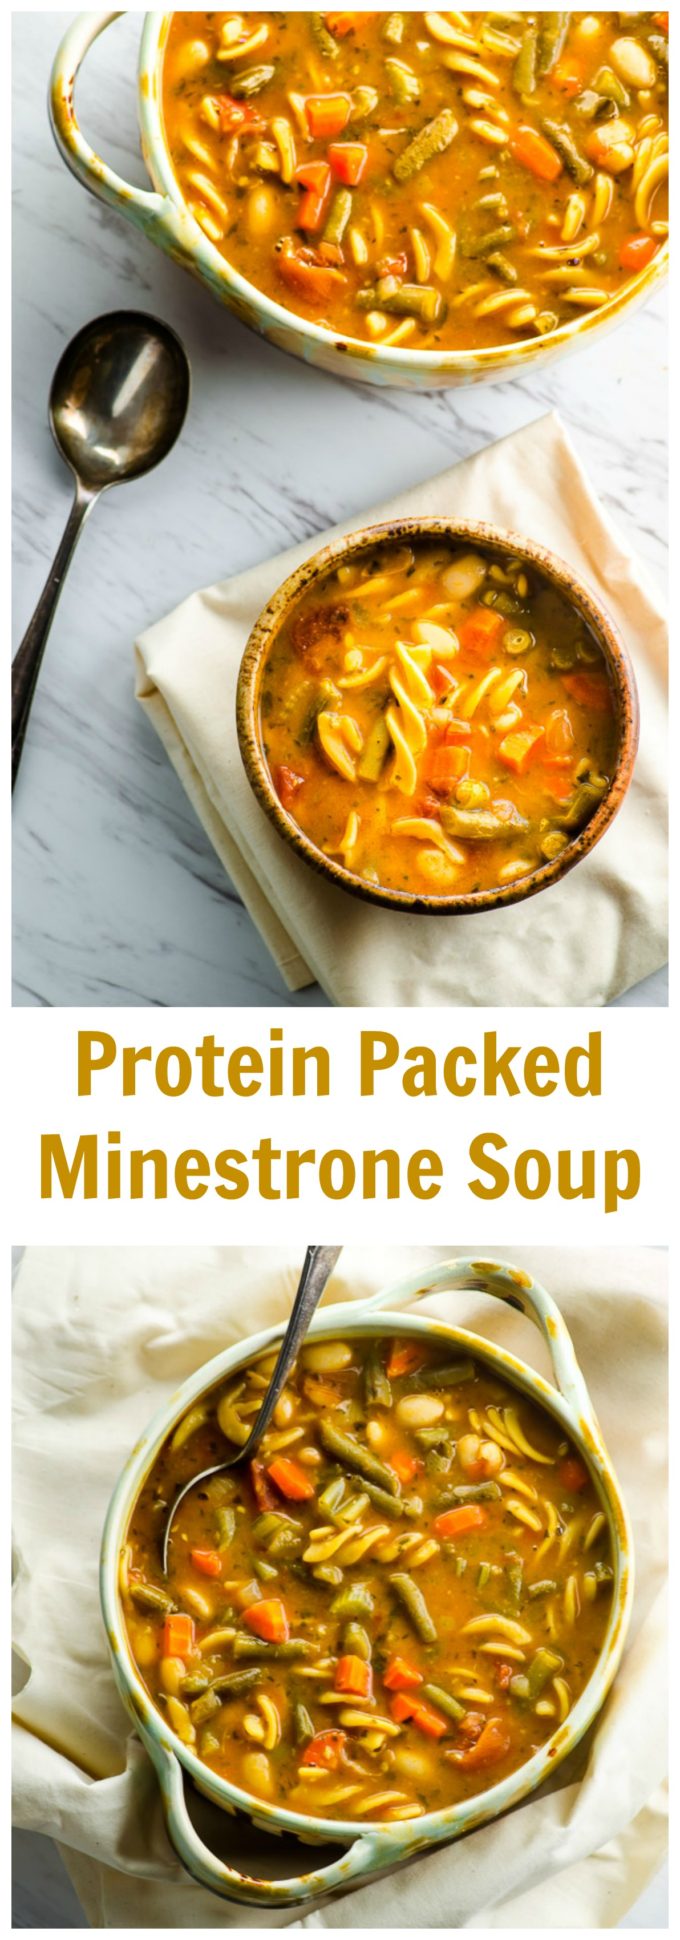 Warm up this winter with a big bowl of this Protein Packed Minestrone Soup. A complete meal in a bowl you'll love!